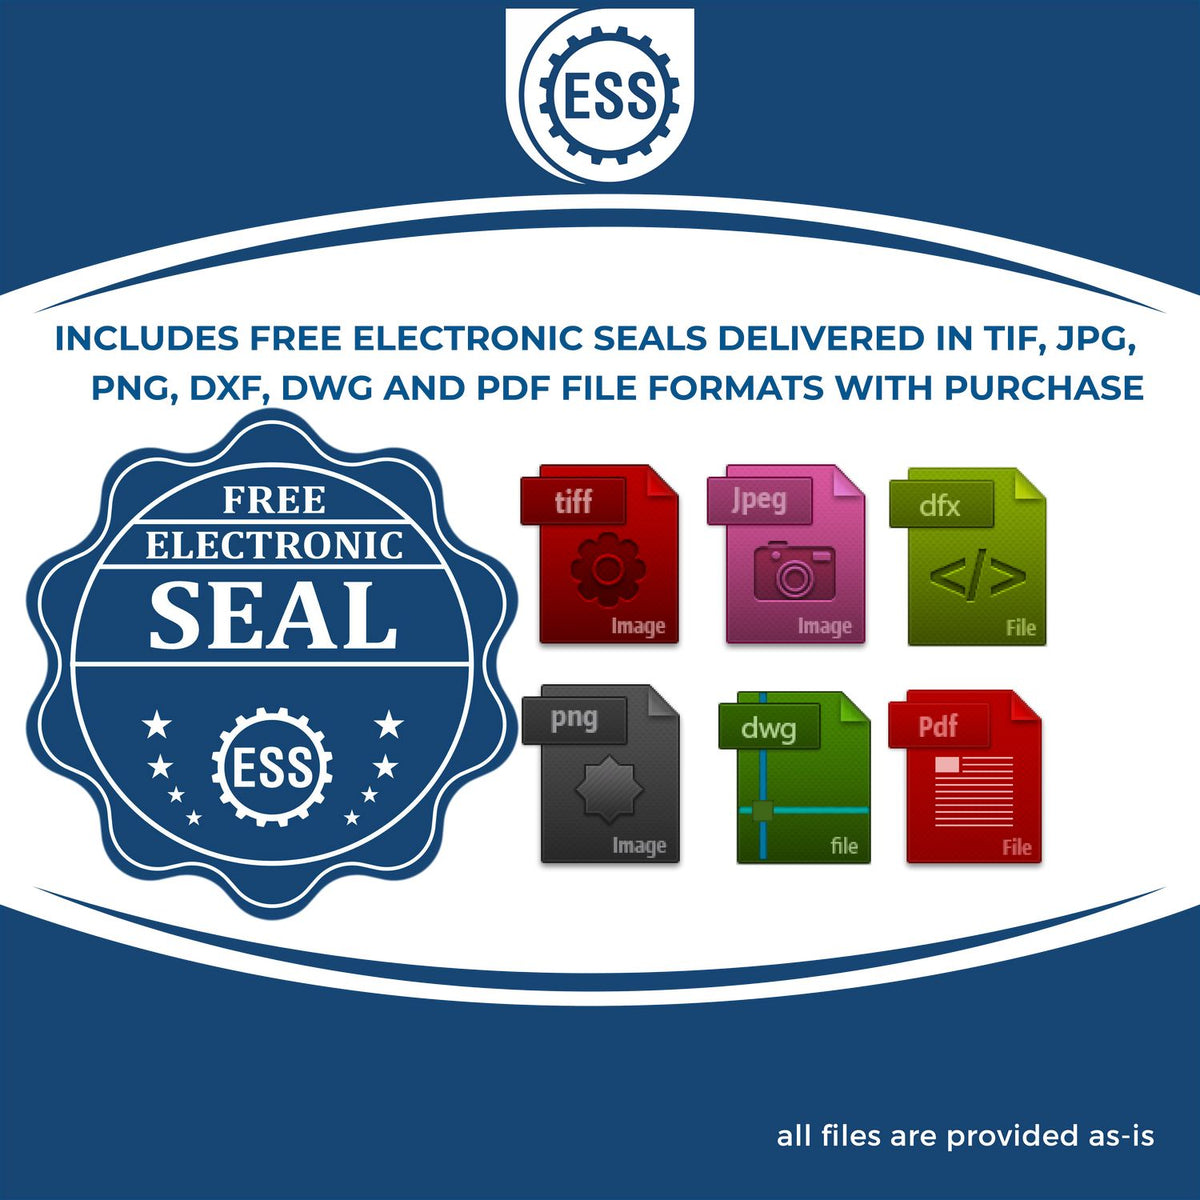 An infographic for the free electronic seal for the Gift Ohio Land Surveyor Seal illustrating the different file type icons such as DXF, DWG, TIF, JPG and PNG.